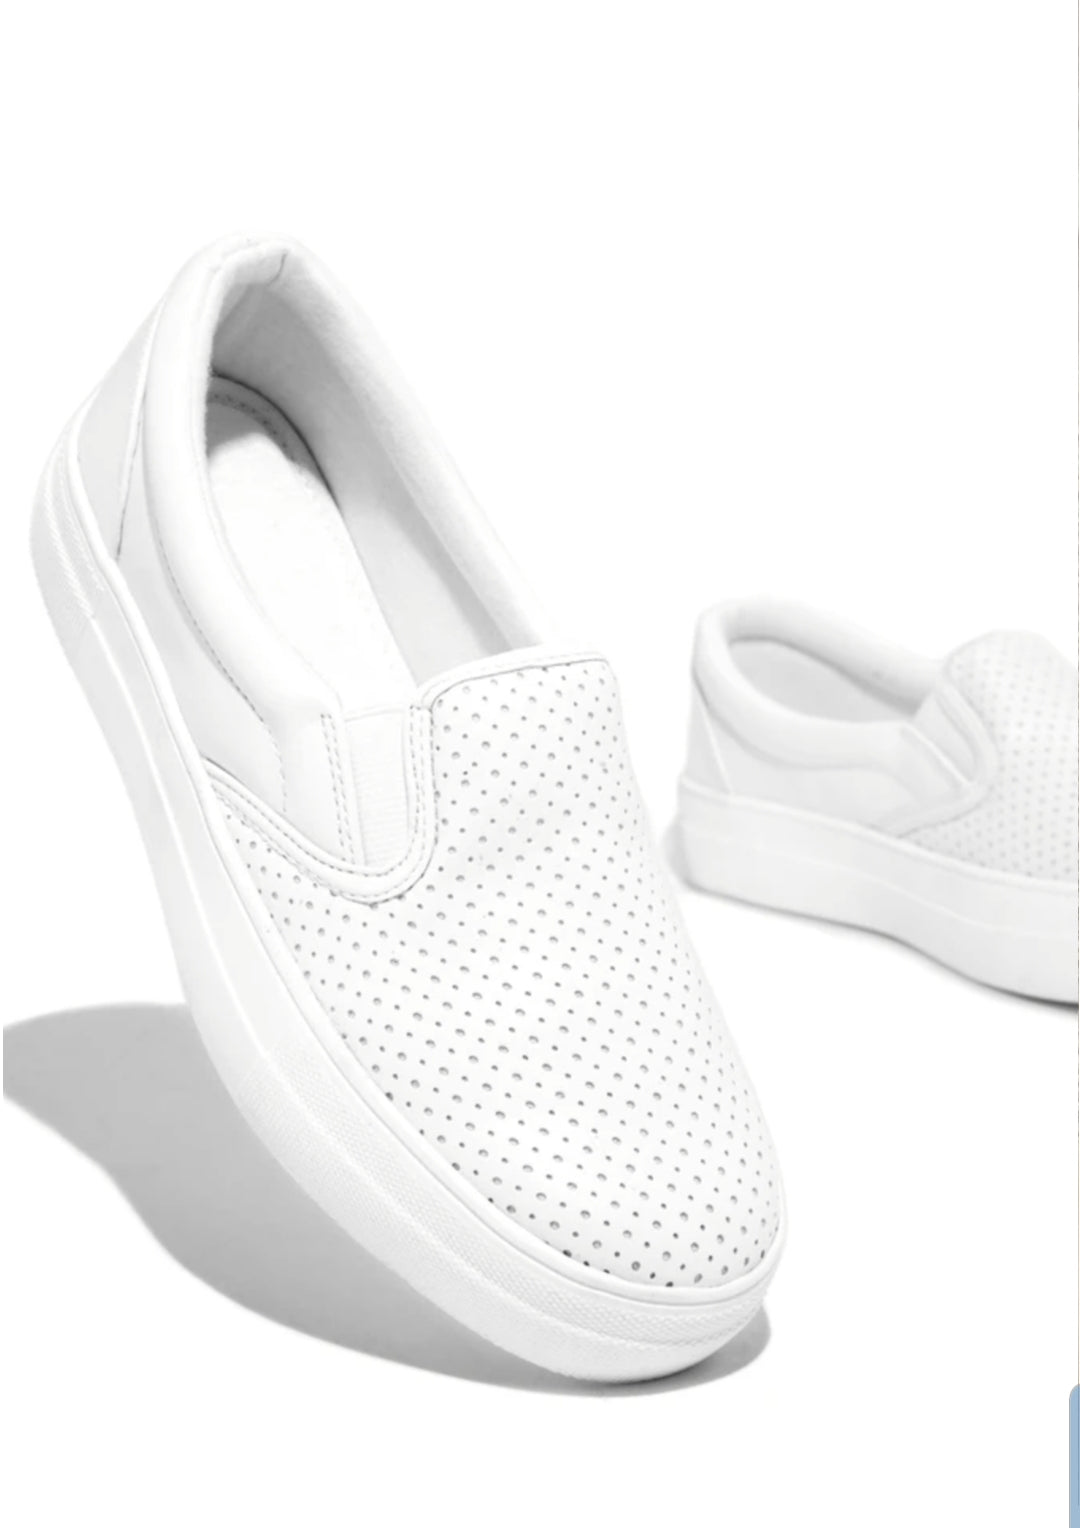 The Victoria Slip On Perforated  Platform White Sneakers